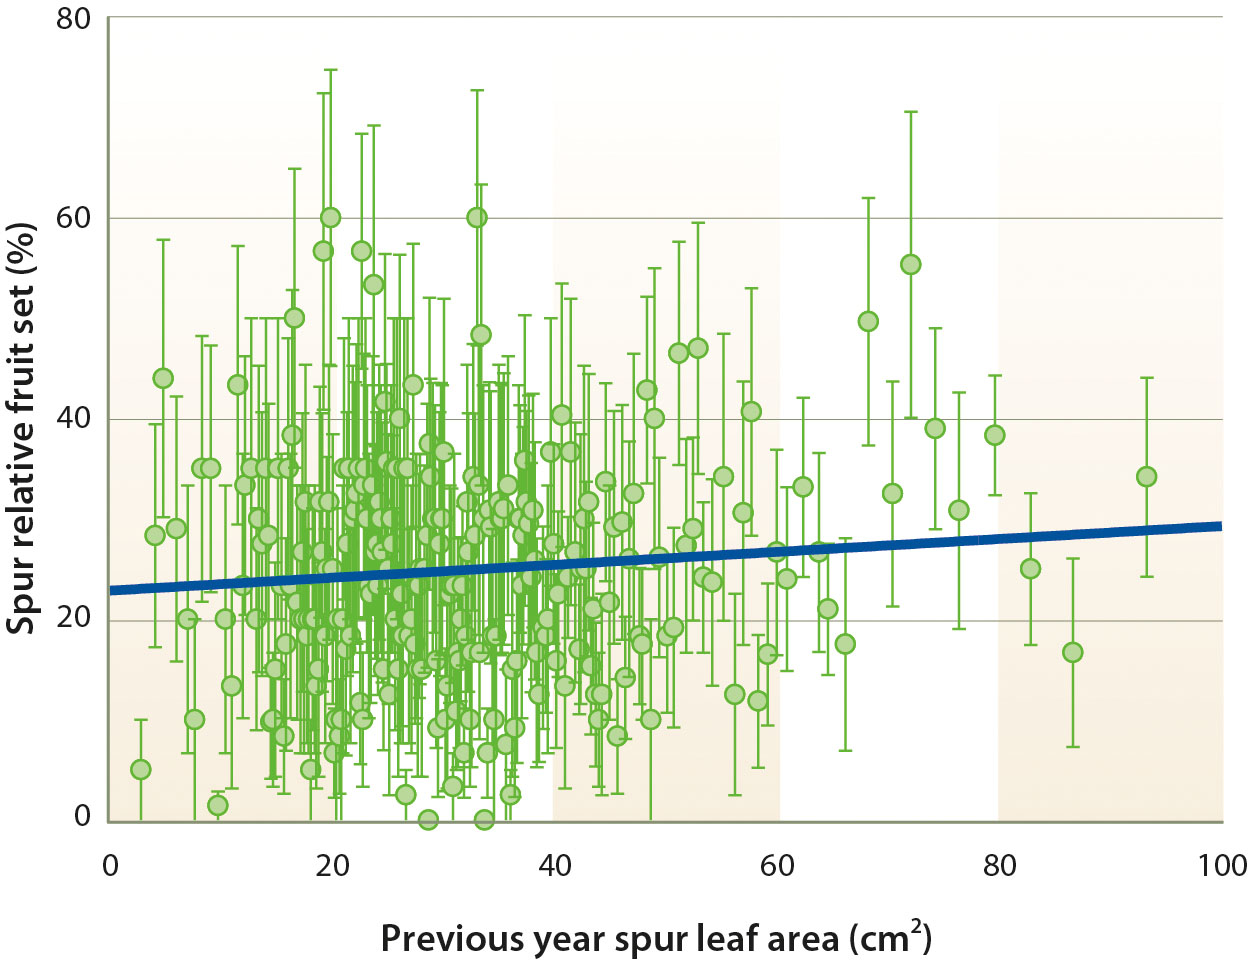 Relationship between spur relative fruit set and previous year spur leaf area on tagged spurs from 2002 to 2007 (R2 = 0.007, P = 0.16). Each point is the mean of 10 spurs ± SE. 1 cm2 = 0.001 ft2.